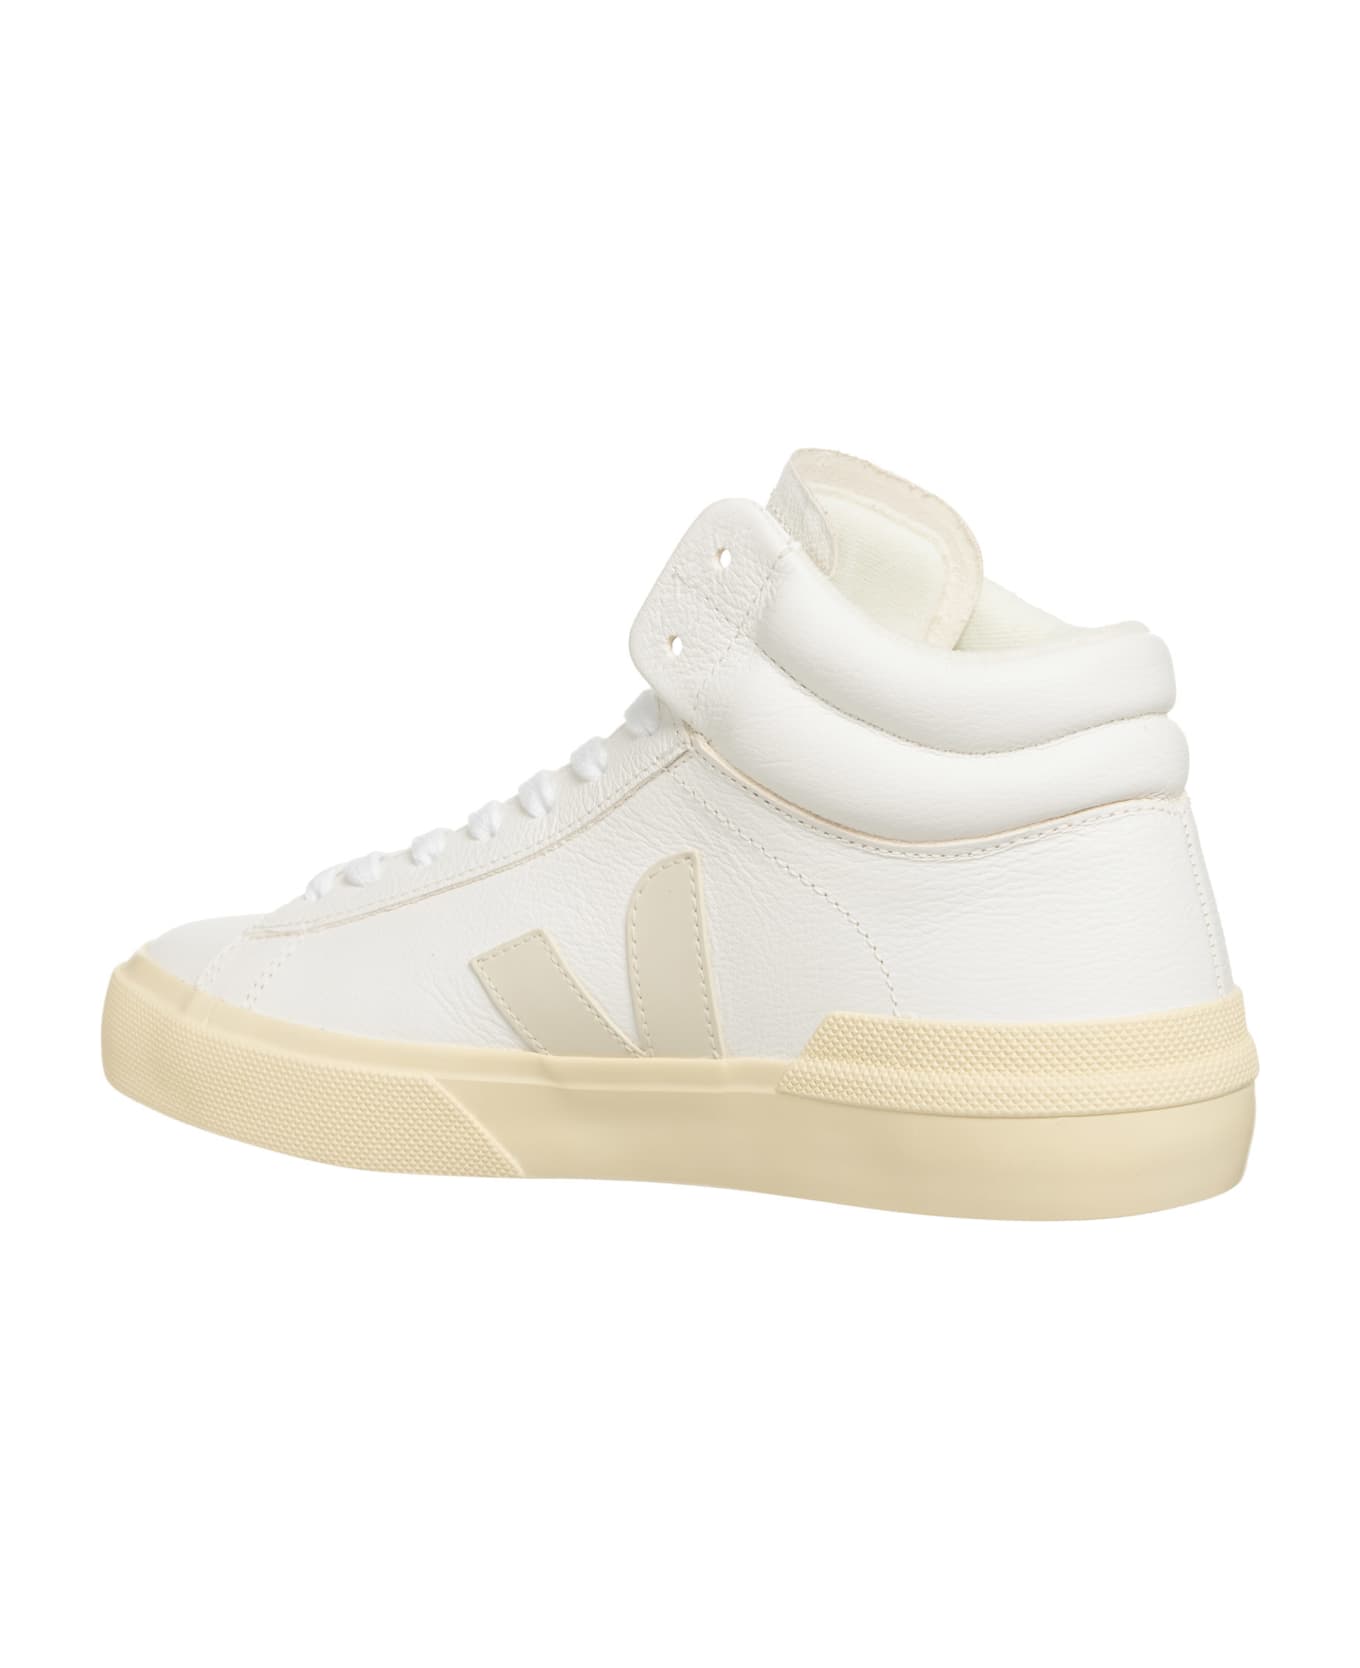 Veja Minotaur Leather High-top Sneakers - White